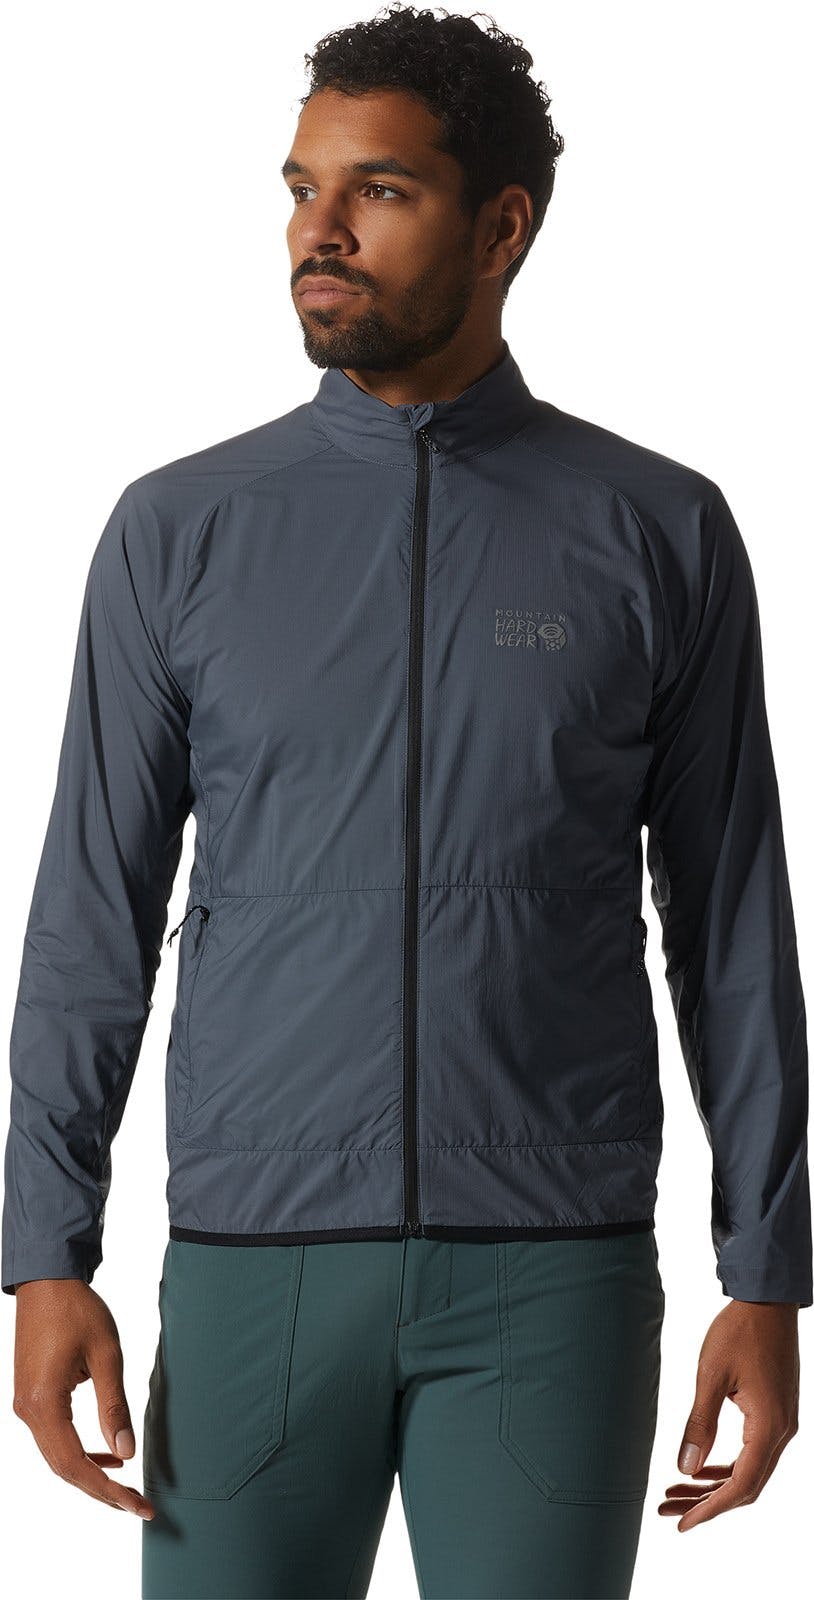 Product image for Kor AirShell™ Full Zip Jacket - Men's